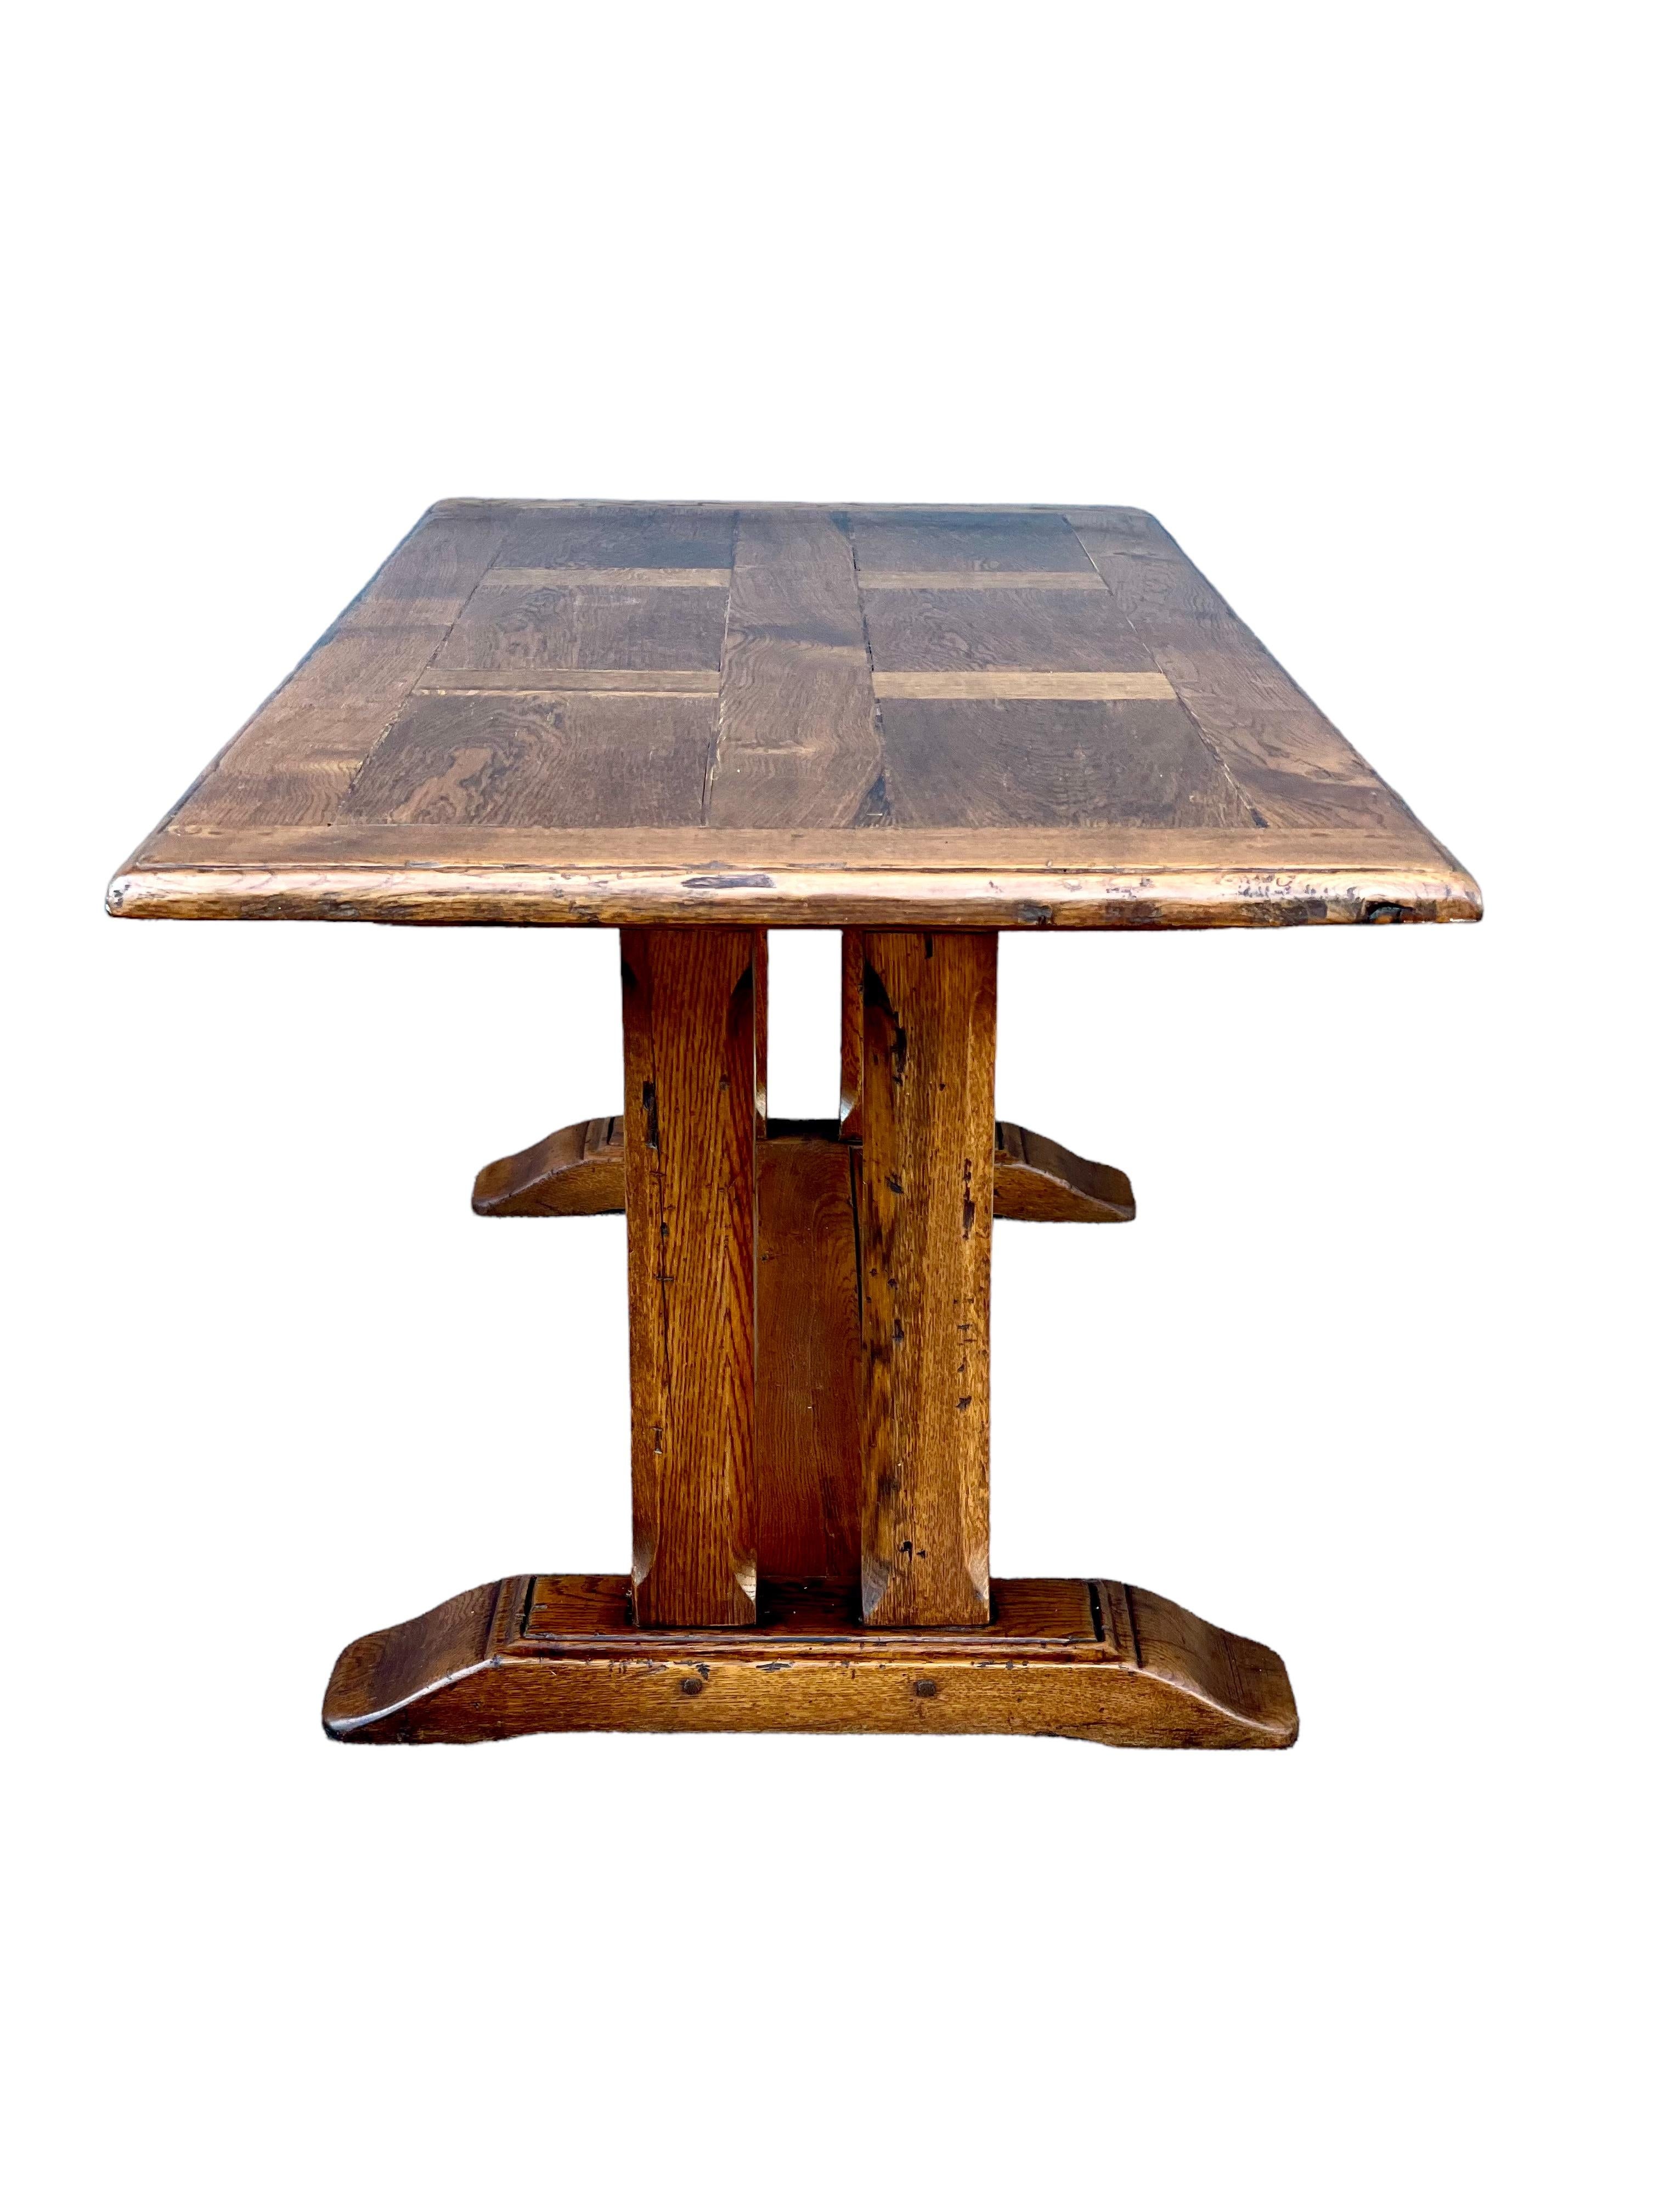 A substantial and very handsome monastery refectory table meticulously crafted from solid oak, and featuring the traditional trestle underframe and stretcher. The Louis XIII style table has a wonderful, authentic patina, gained from generations of